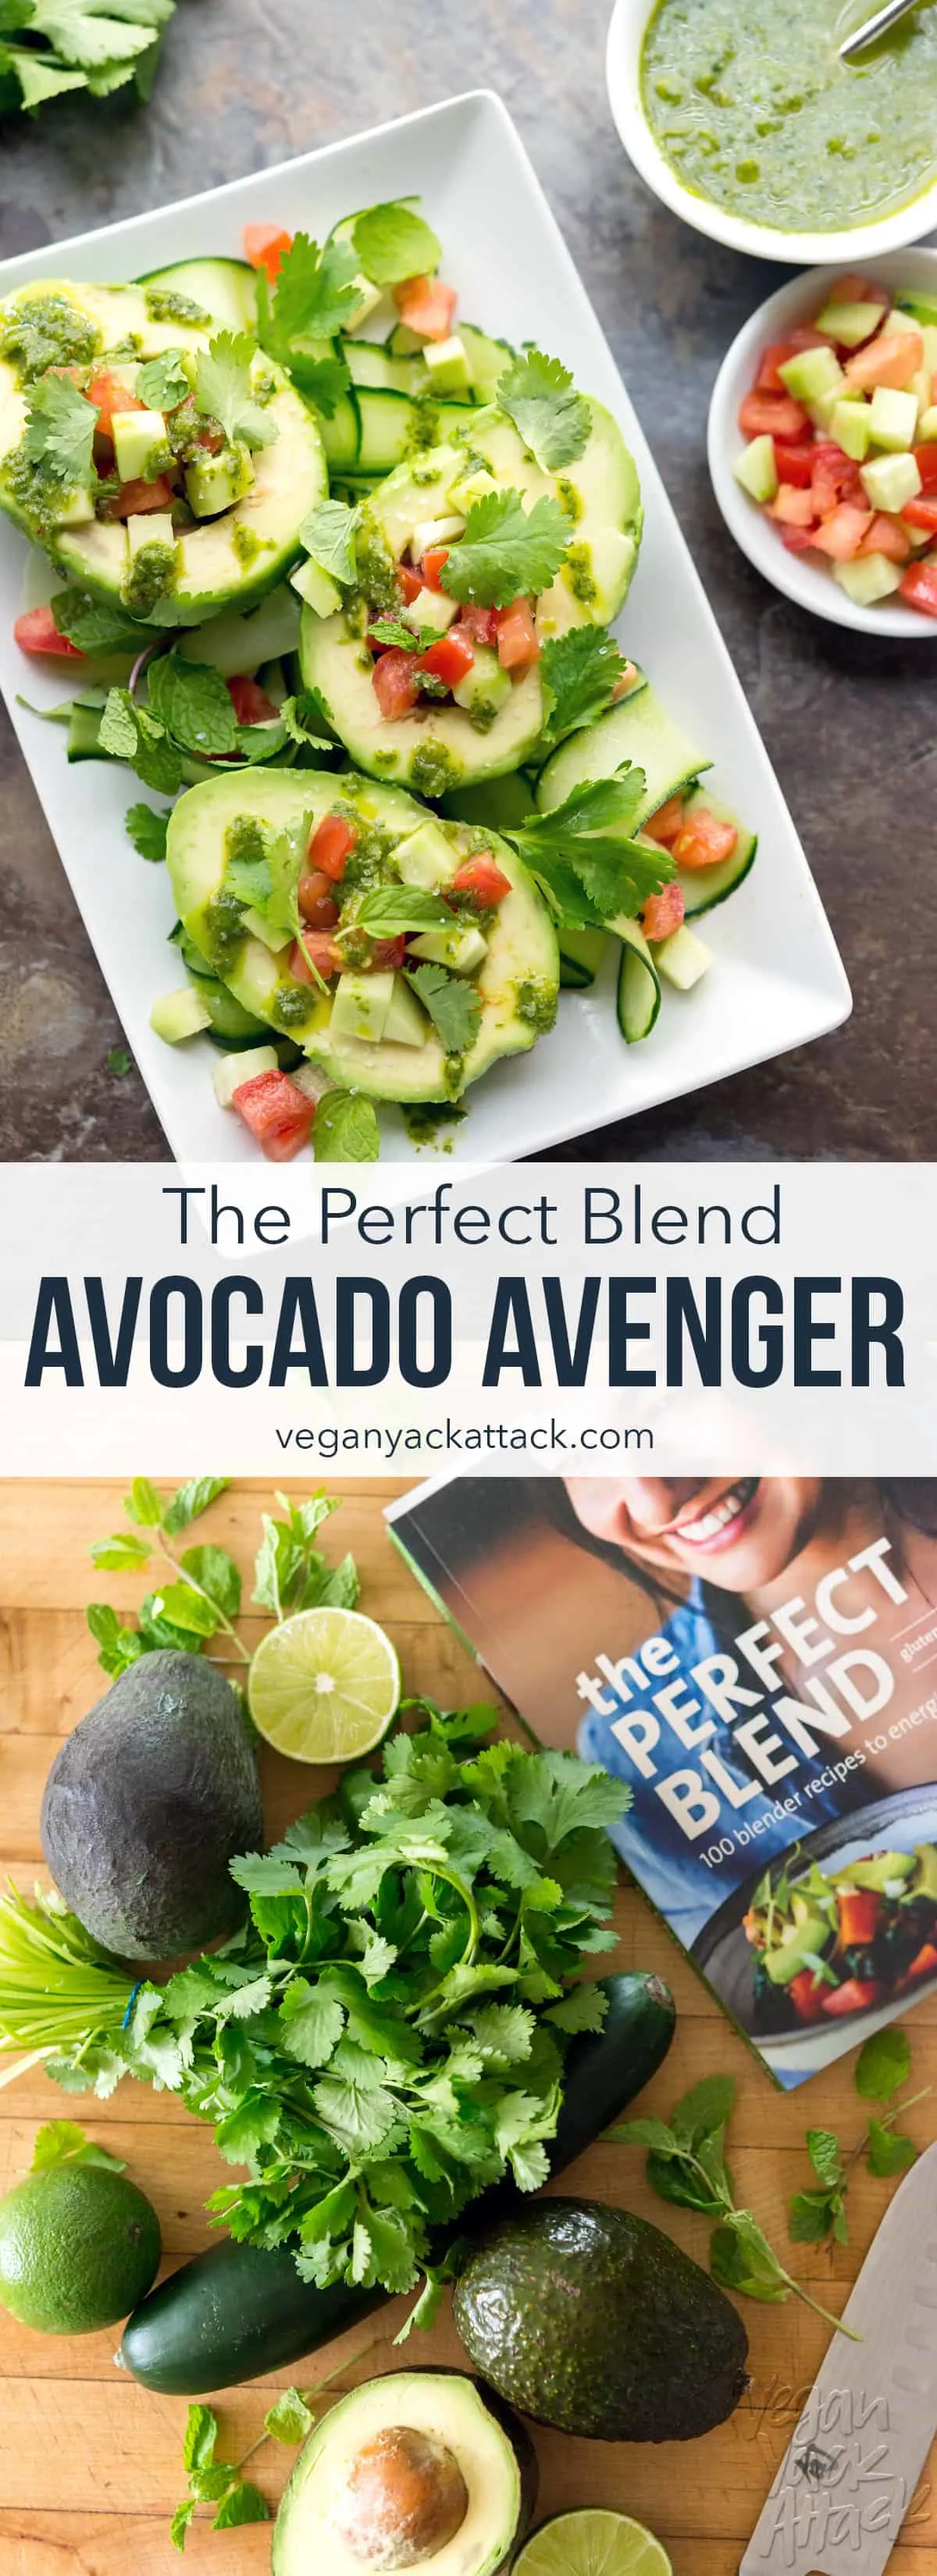 Avocado Avenger from The Perfect Blend Cookbook - An easy chimichurri sauce covering delicious, filled avocados! #ThePerfectBlend #vegan #vegetarian 